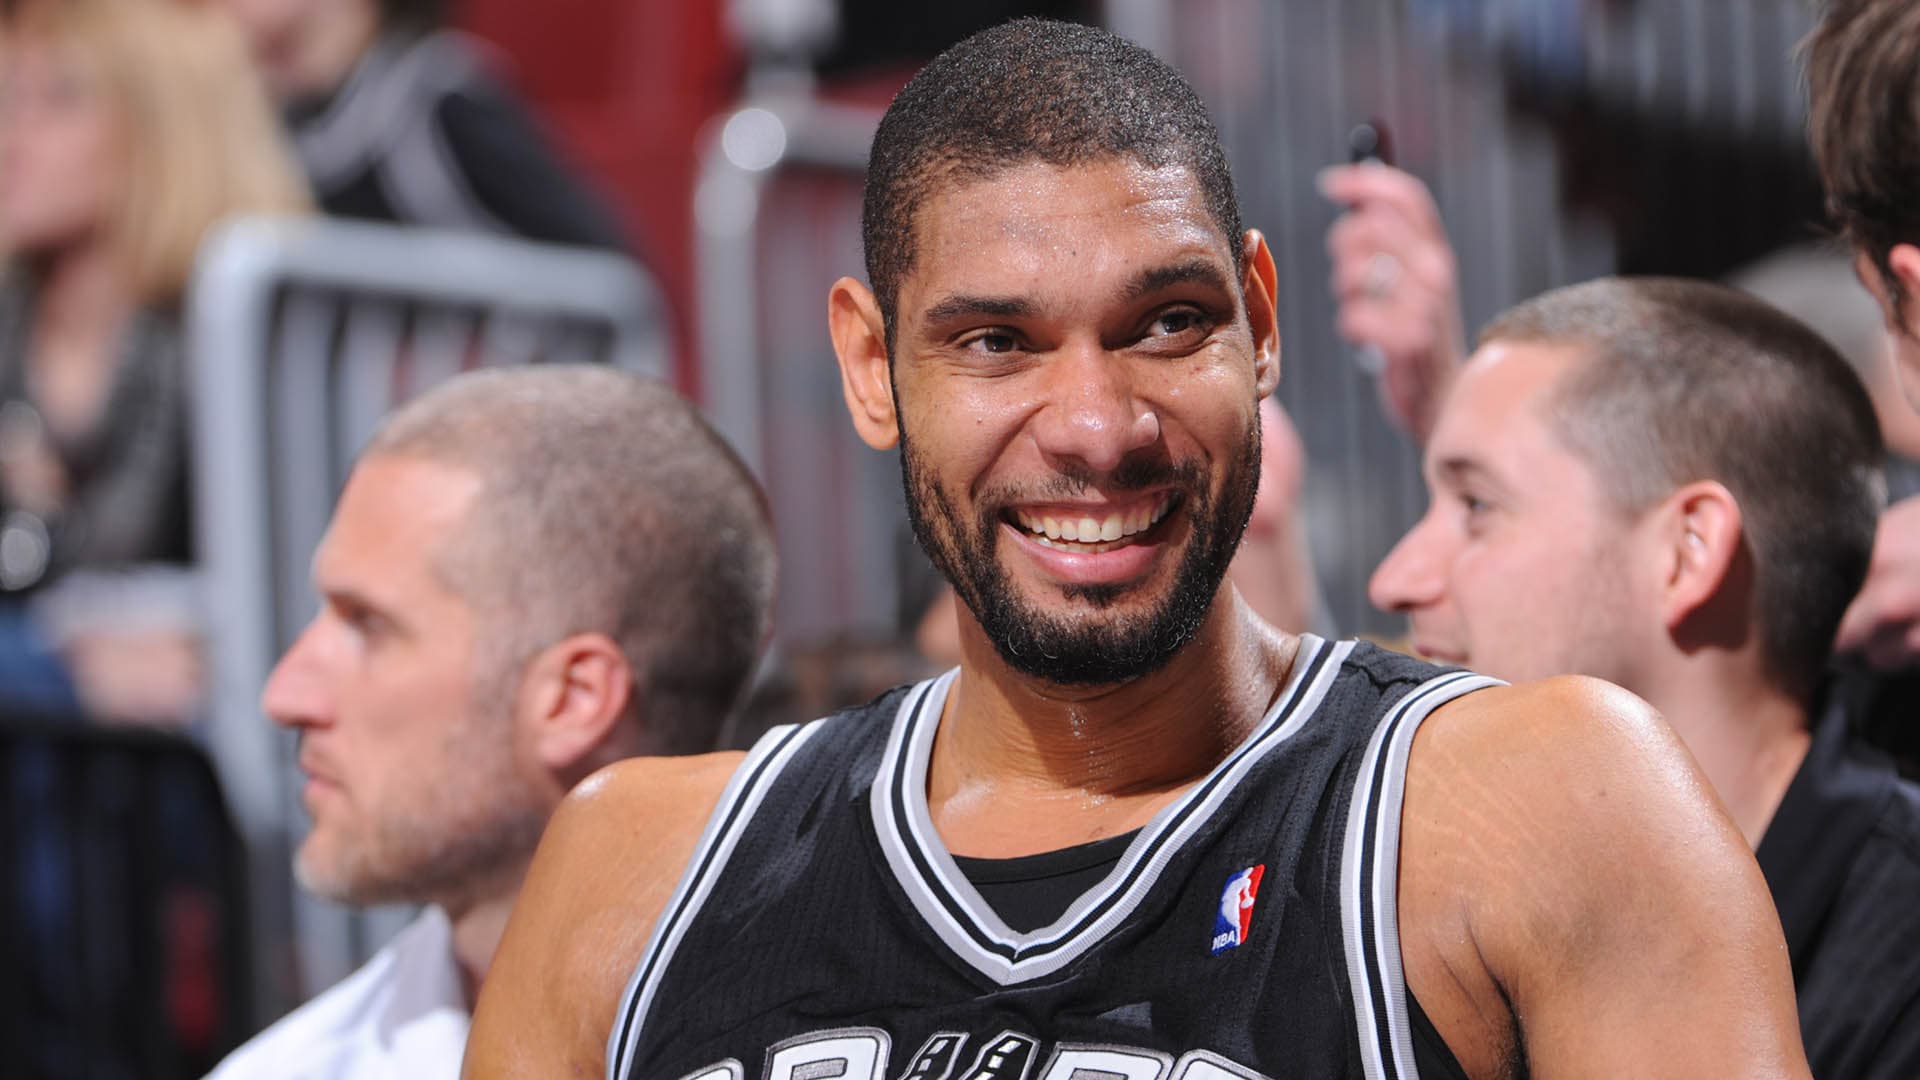 Where Does Tim Duncan Live?